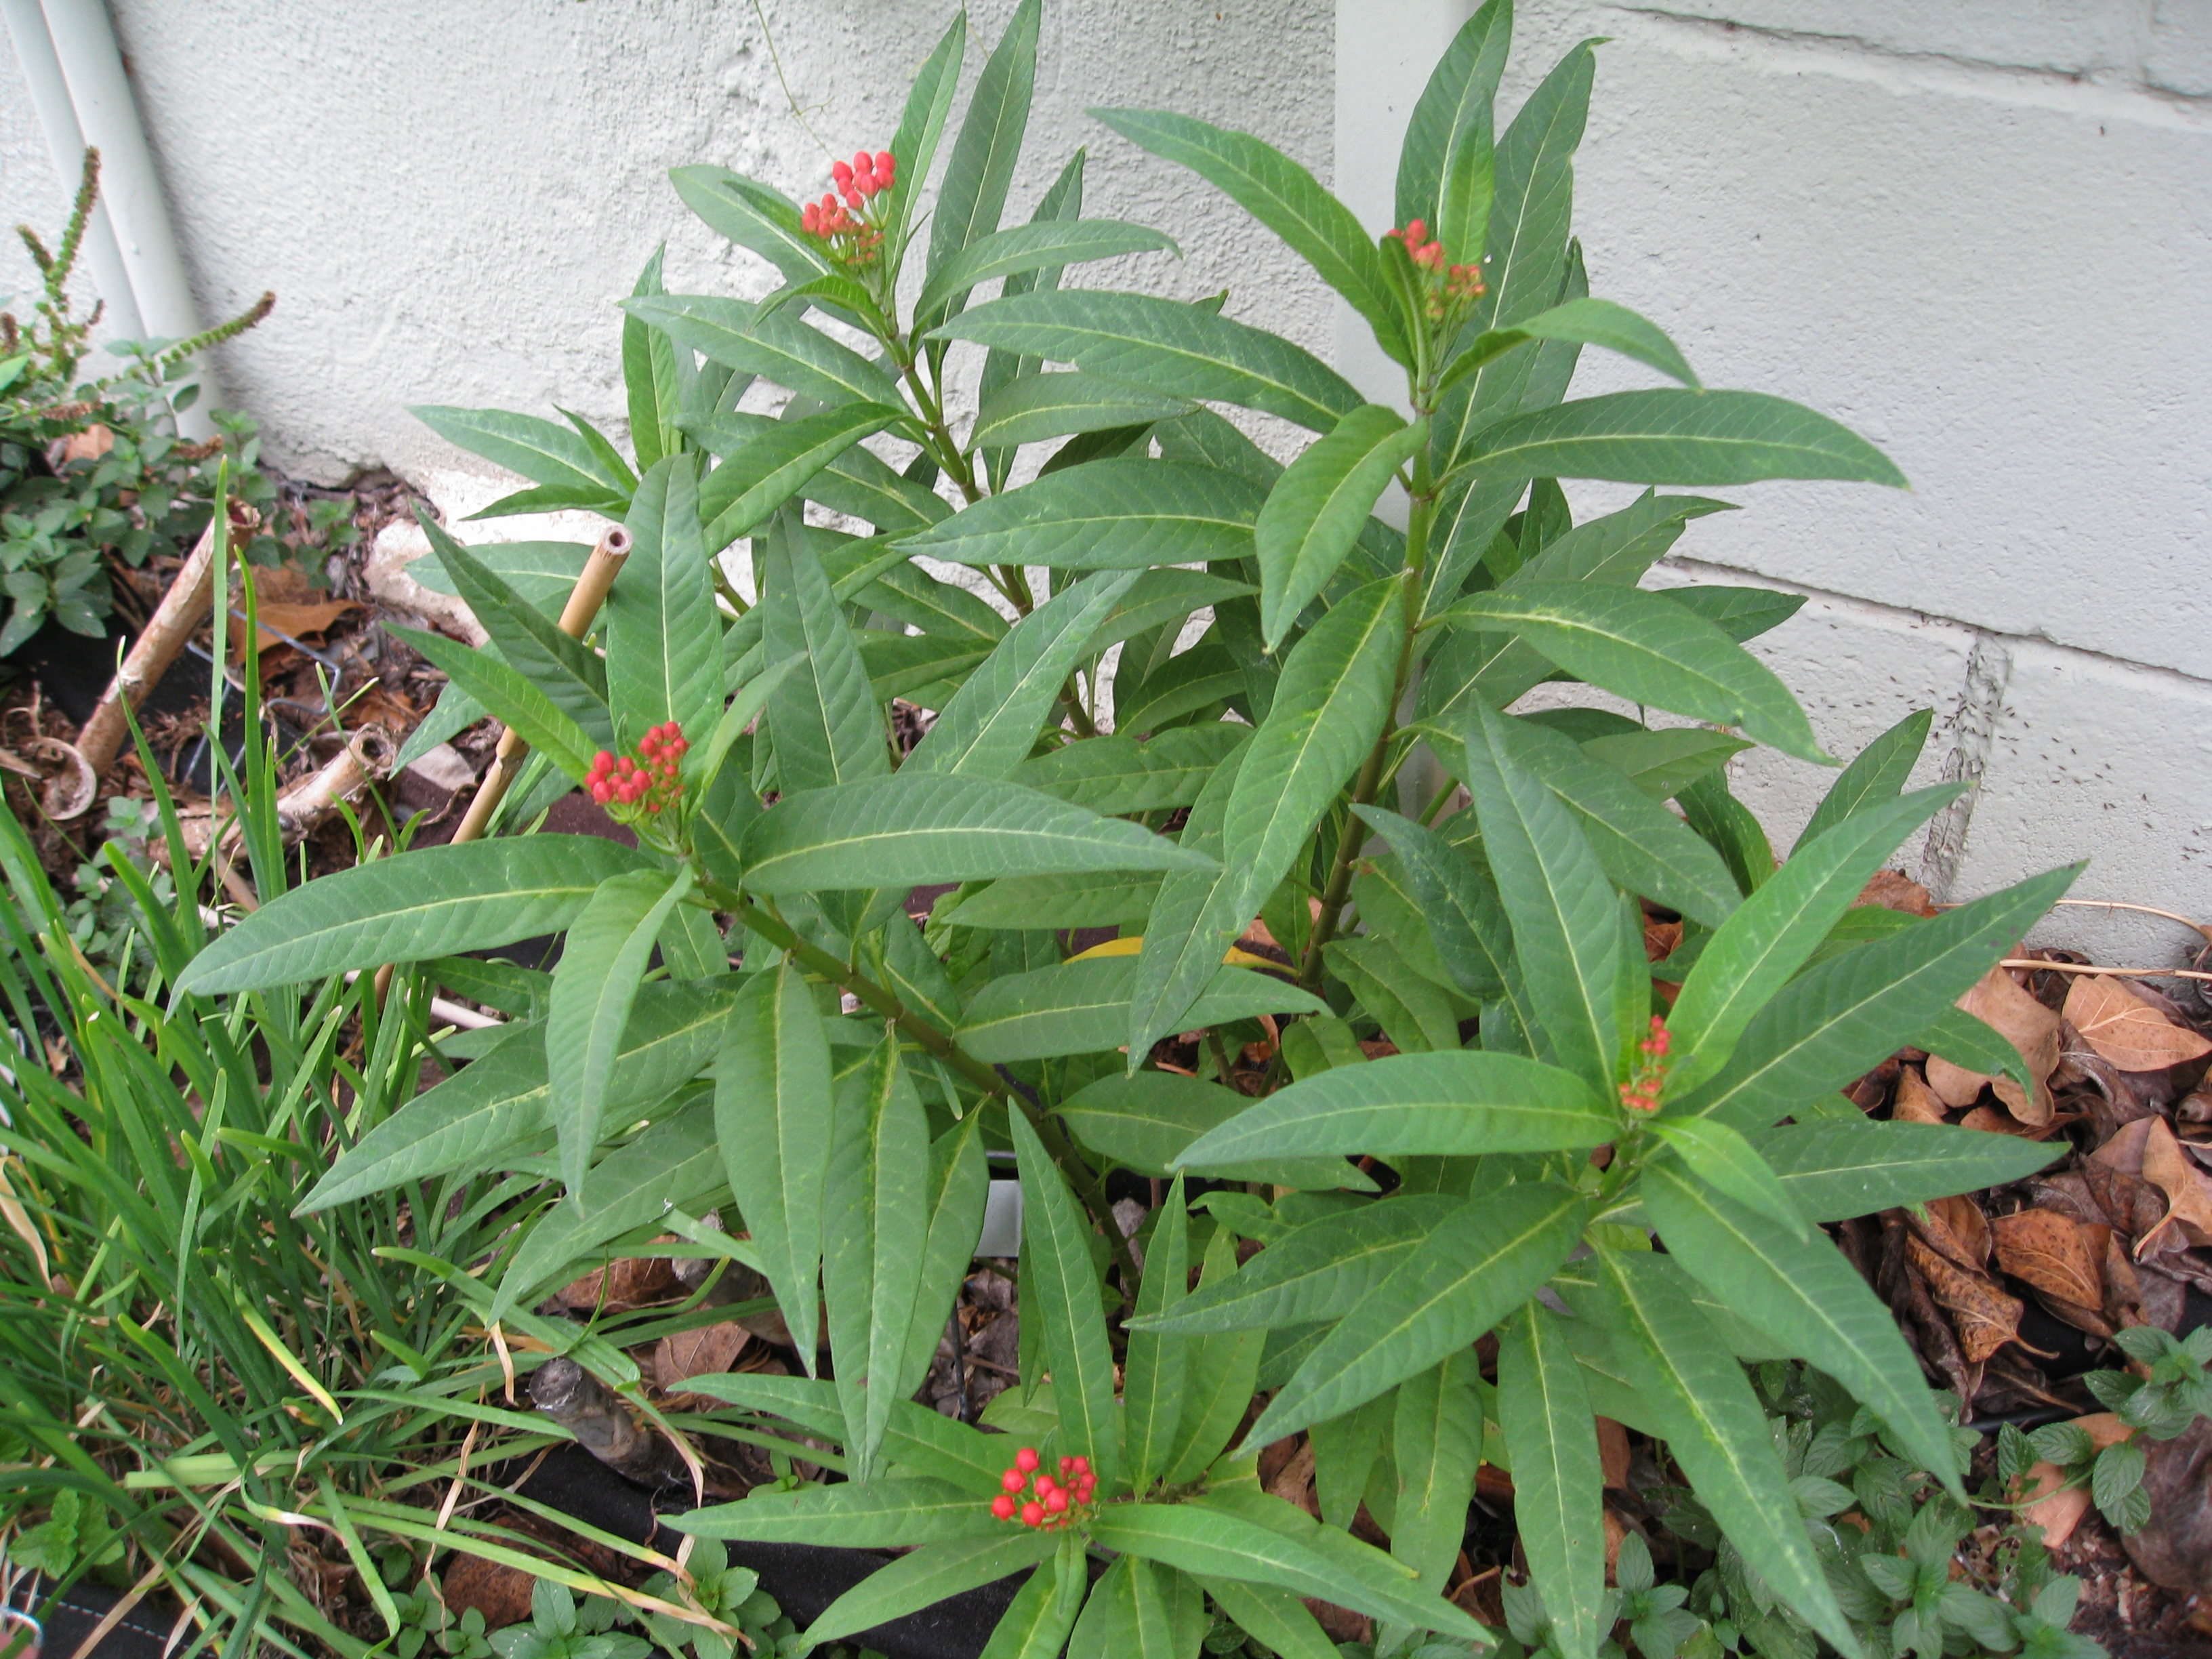 Perennial milkweeds grow back year after year. They provide habitat for traveling Monarch butterflies.